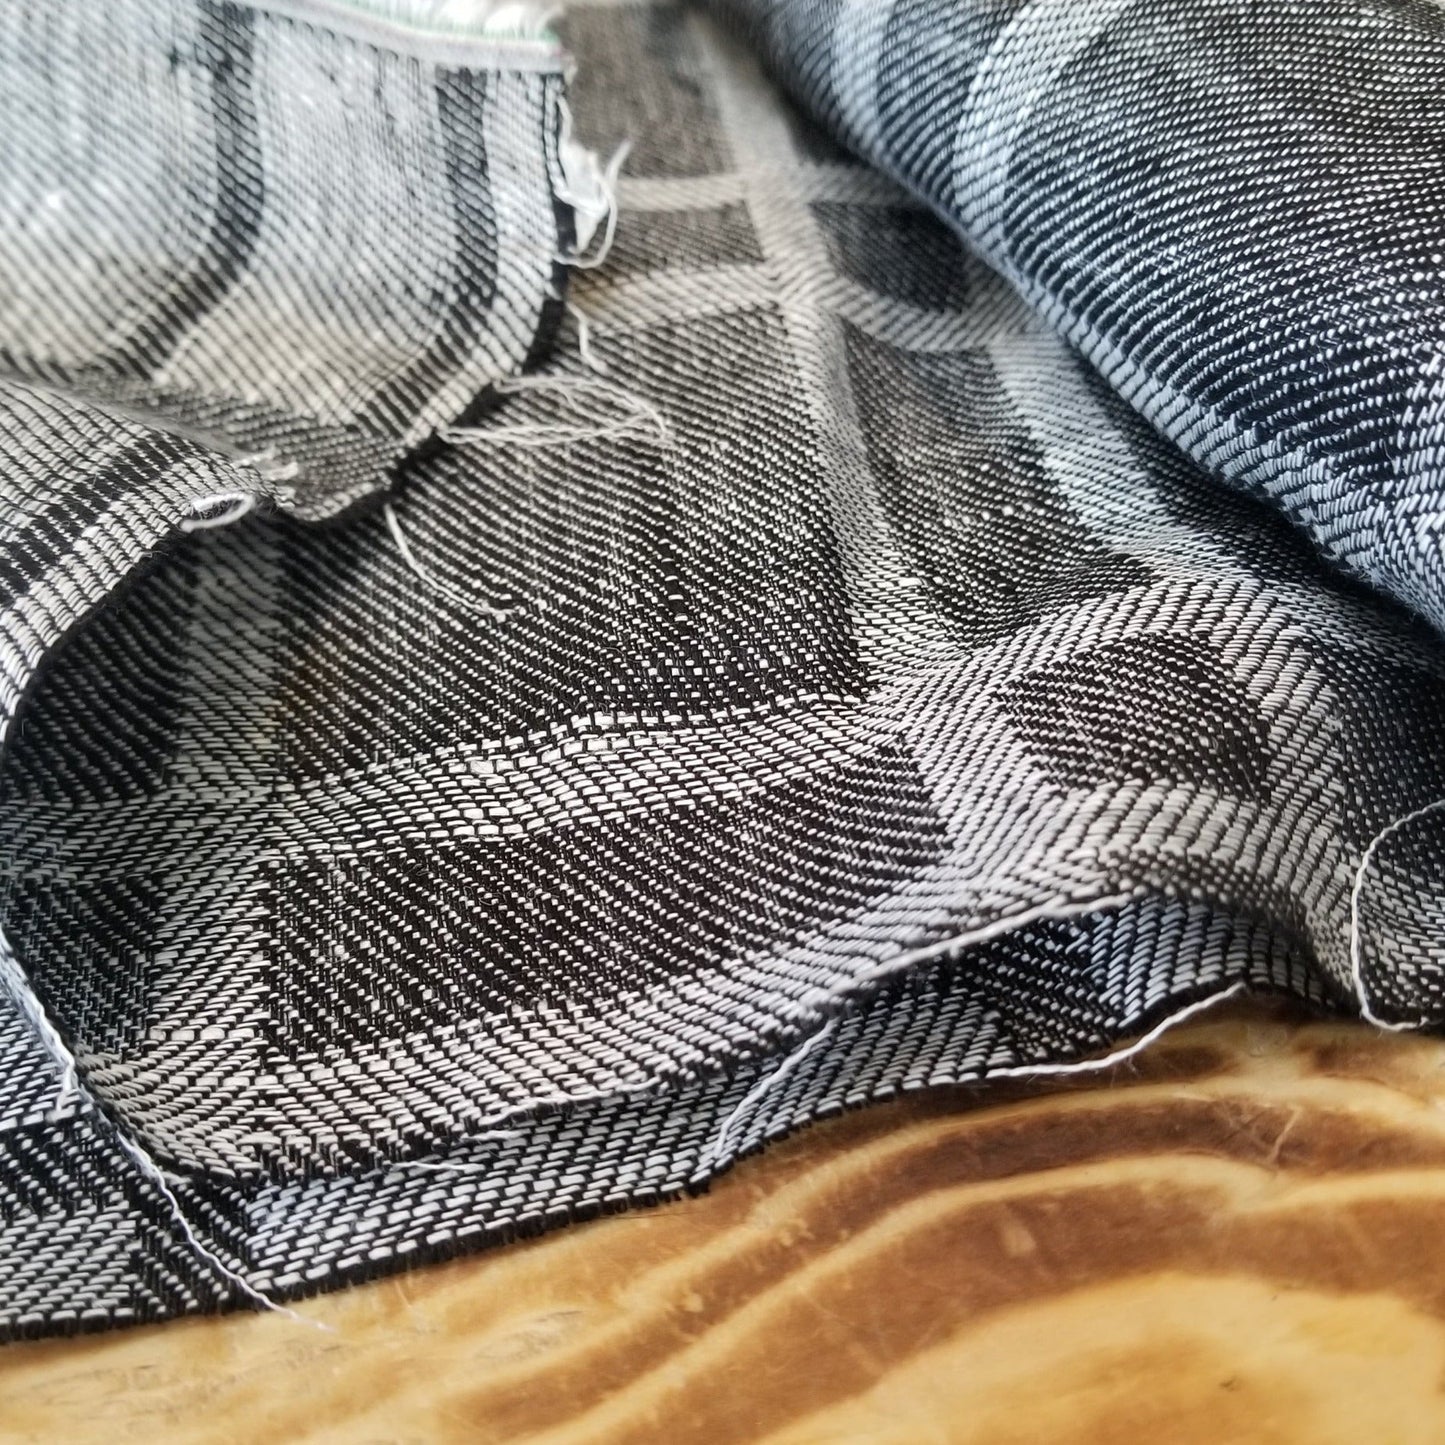 FABRIC SWATCH of Designer Deadstock Windowpane Plaid Black and Gray Linen Jacquard Reversible Woven